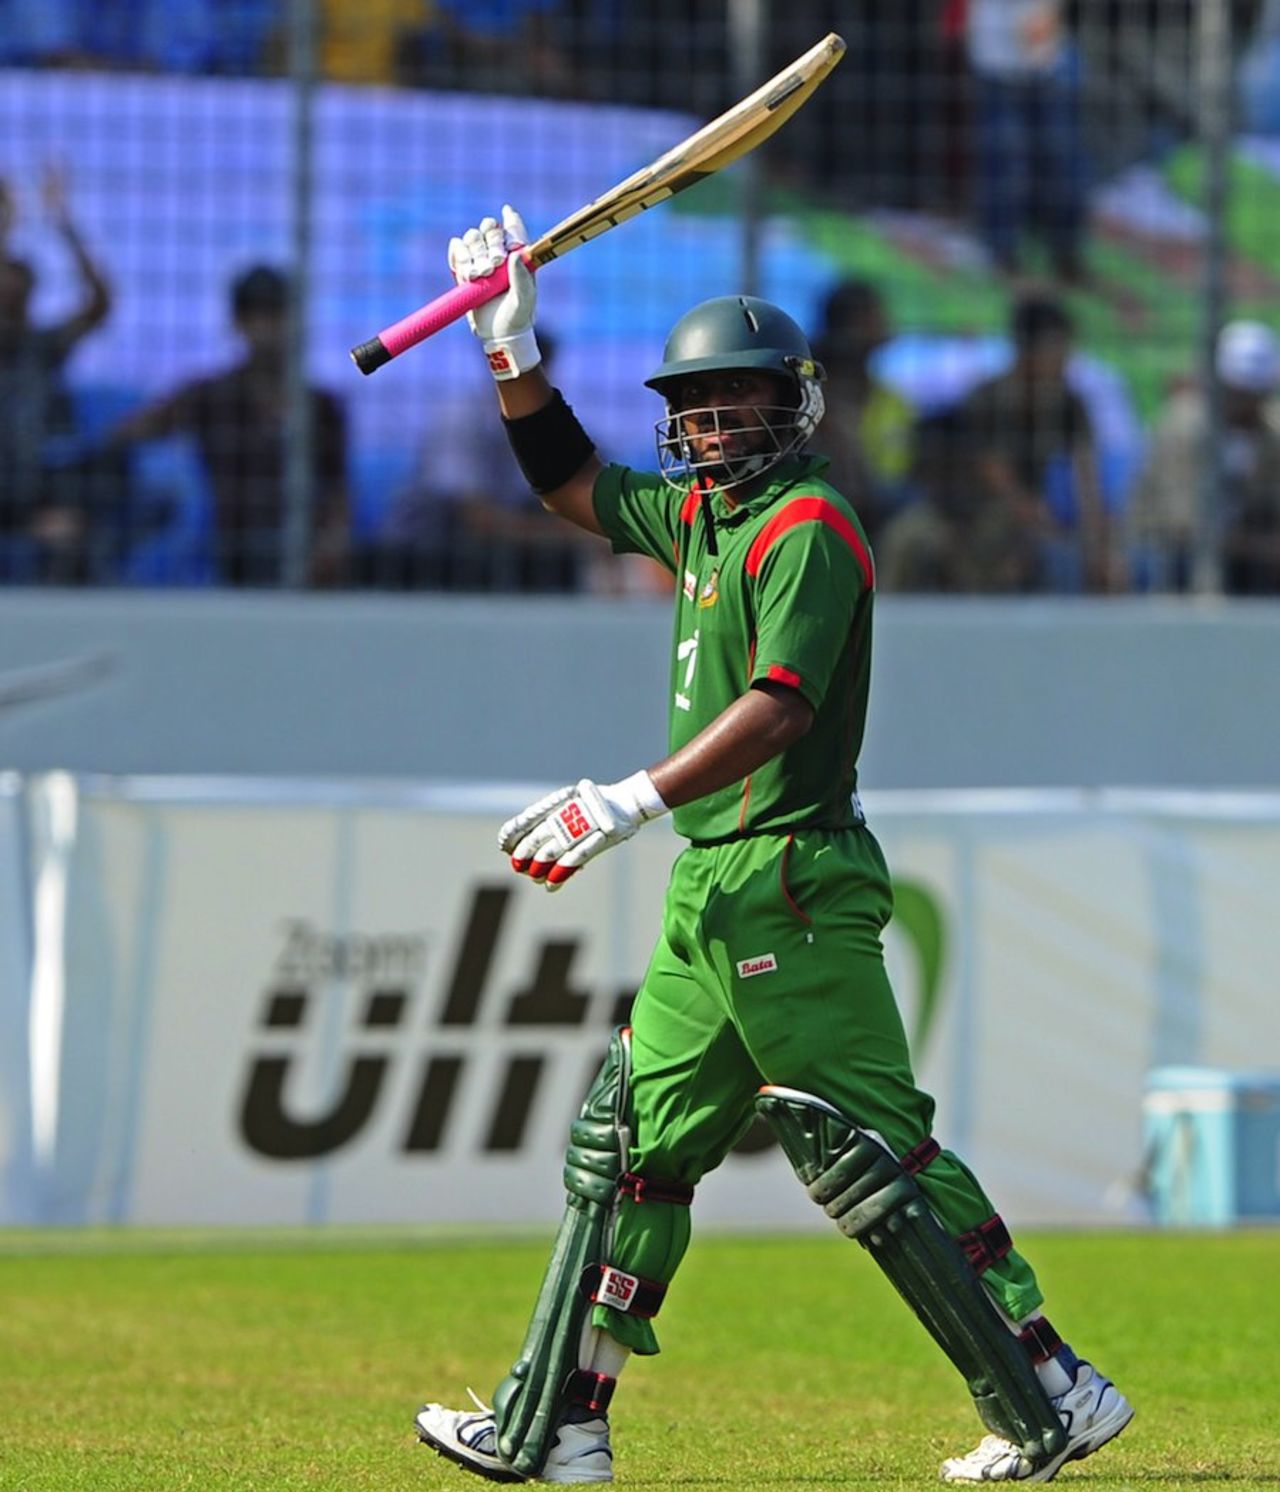 Shahriar Nafees acknowledges the cheers for his match-winning innings, Bangladesh v New Zealand, 3rd ODI, Mirpur, October 11, 2010